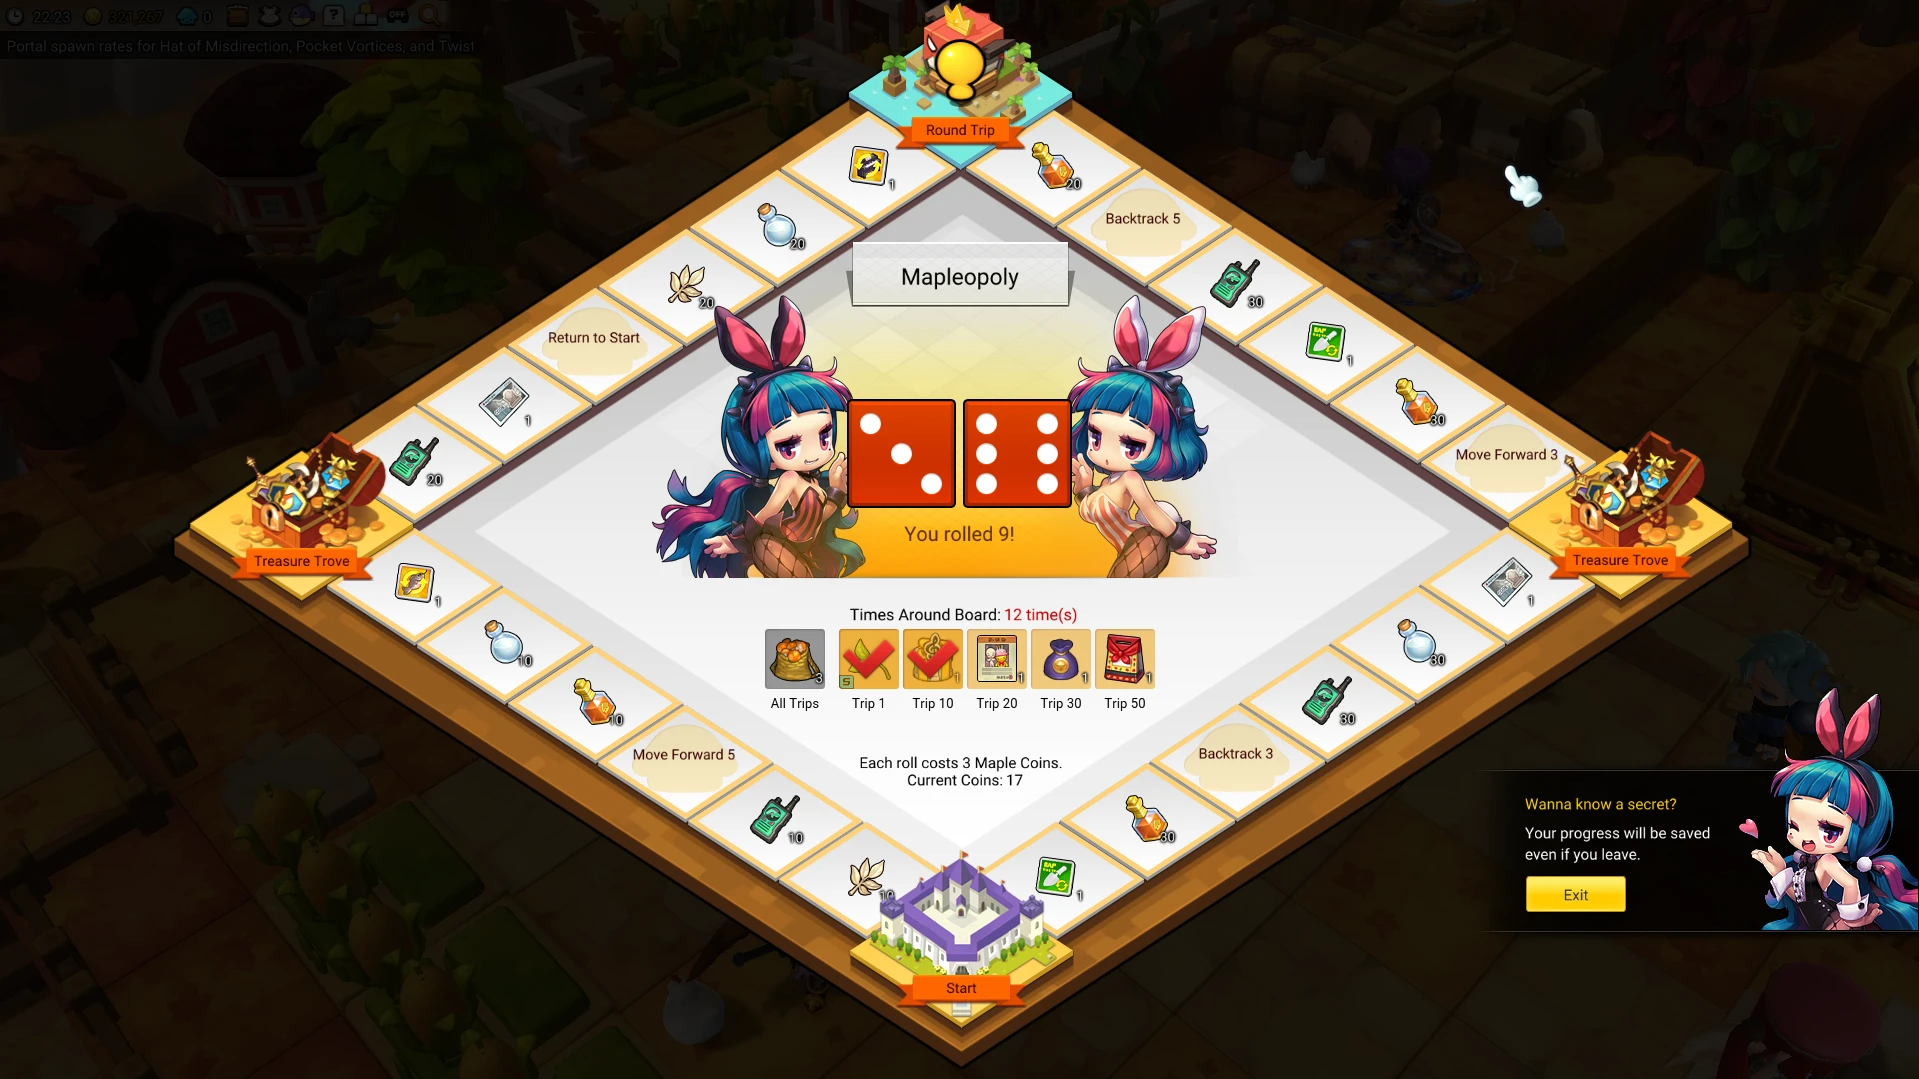 Mapleopoly Event Board in MapleStory 2